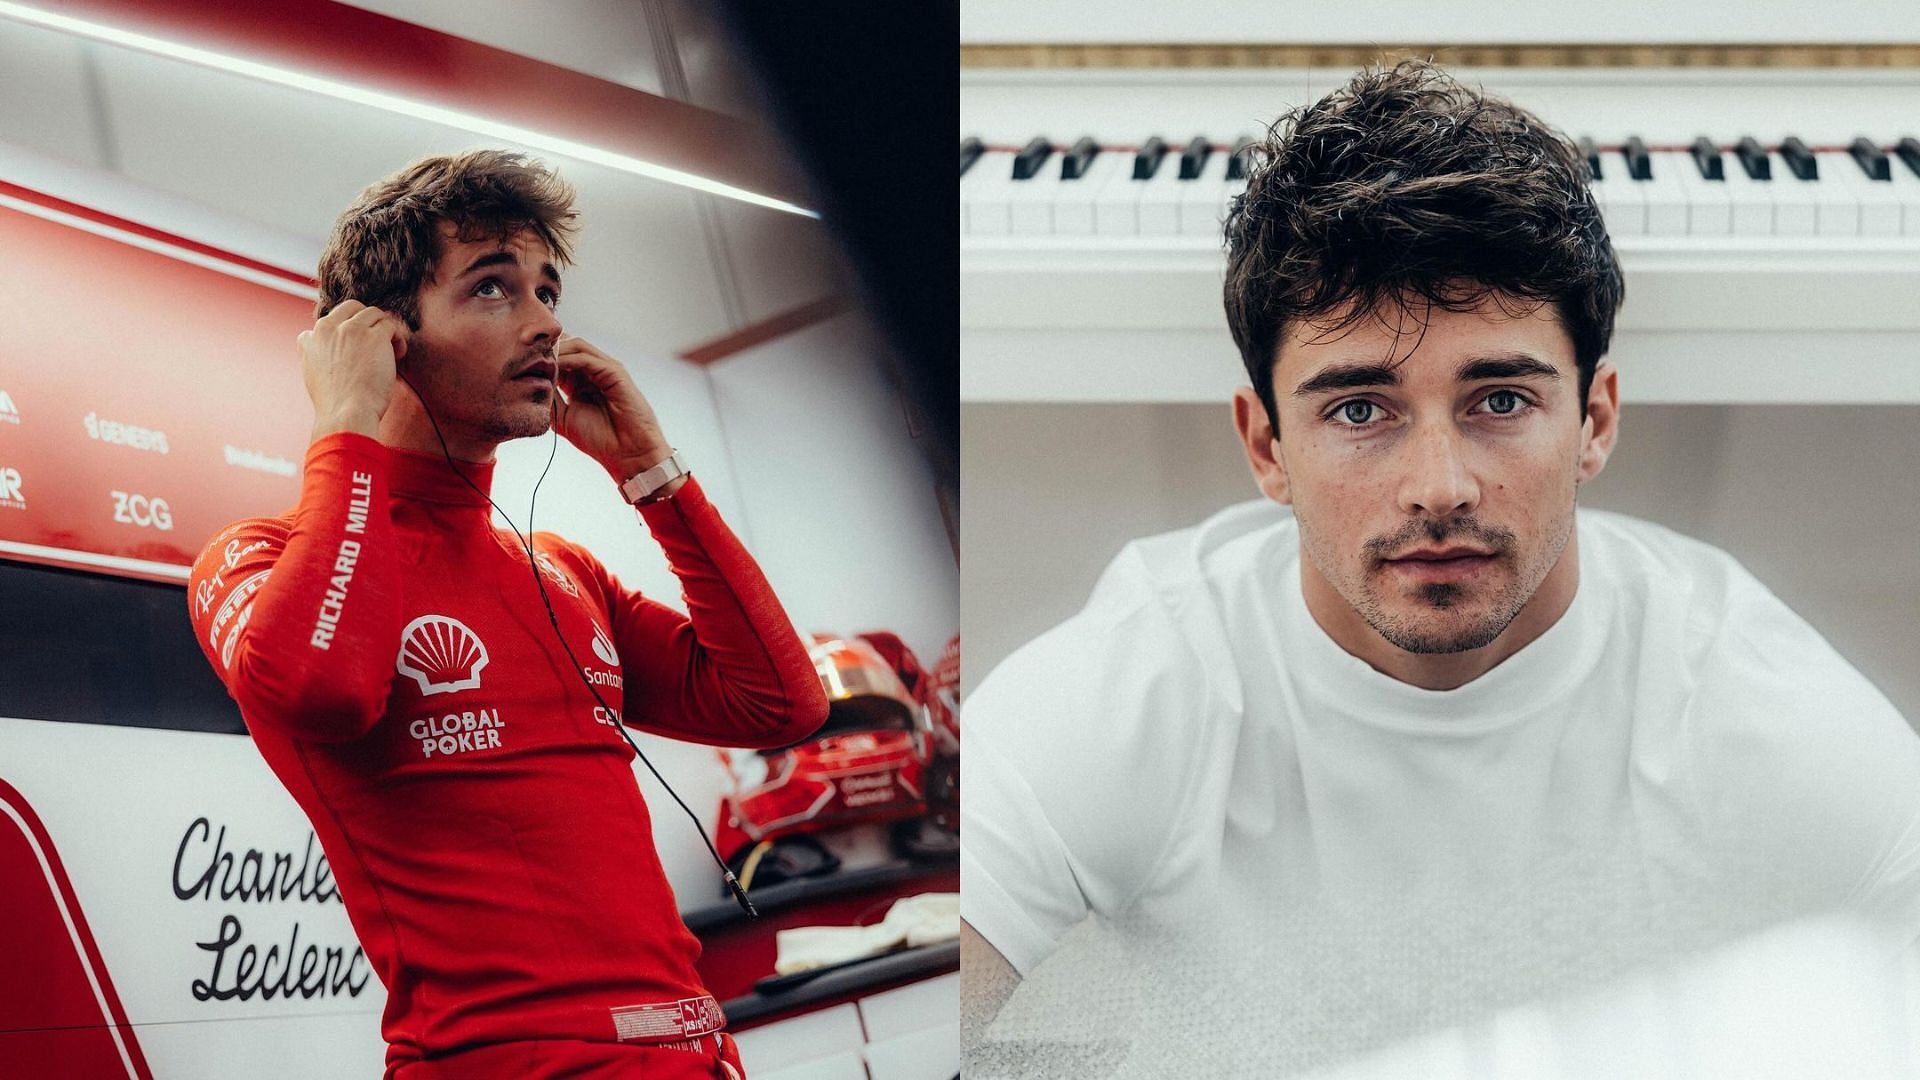 Charles Leclerc magazine covers (Image via @charles_leclerc/ Instagram)